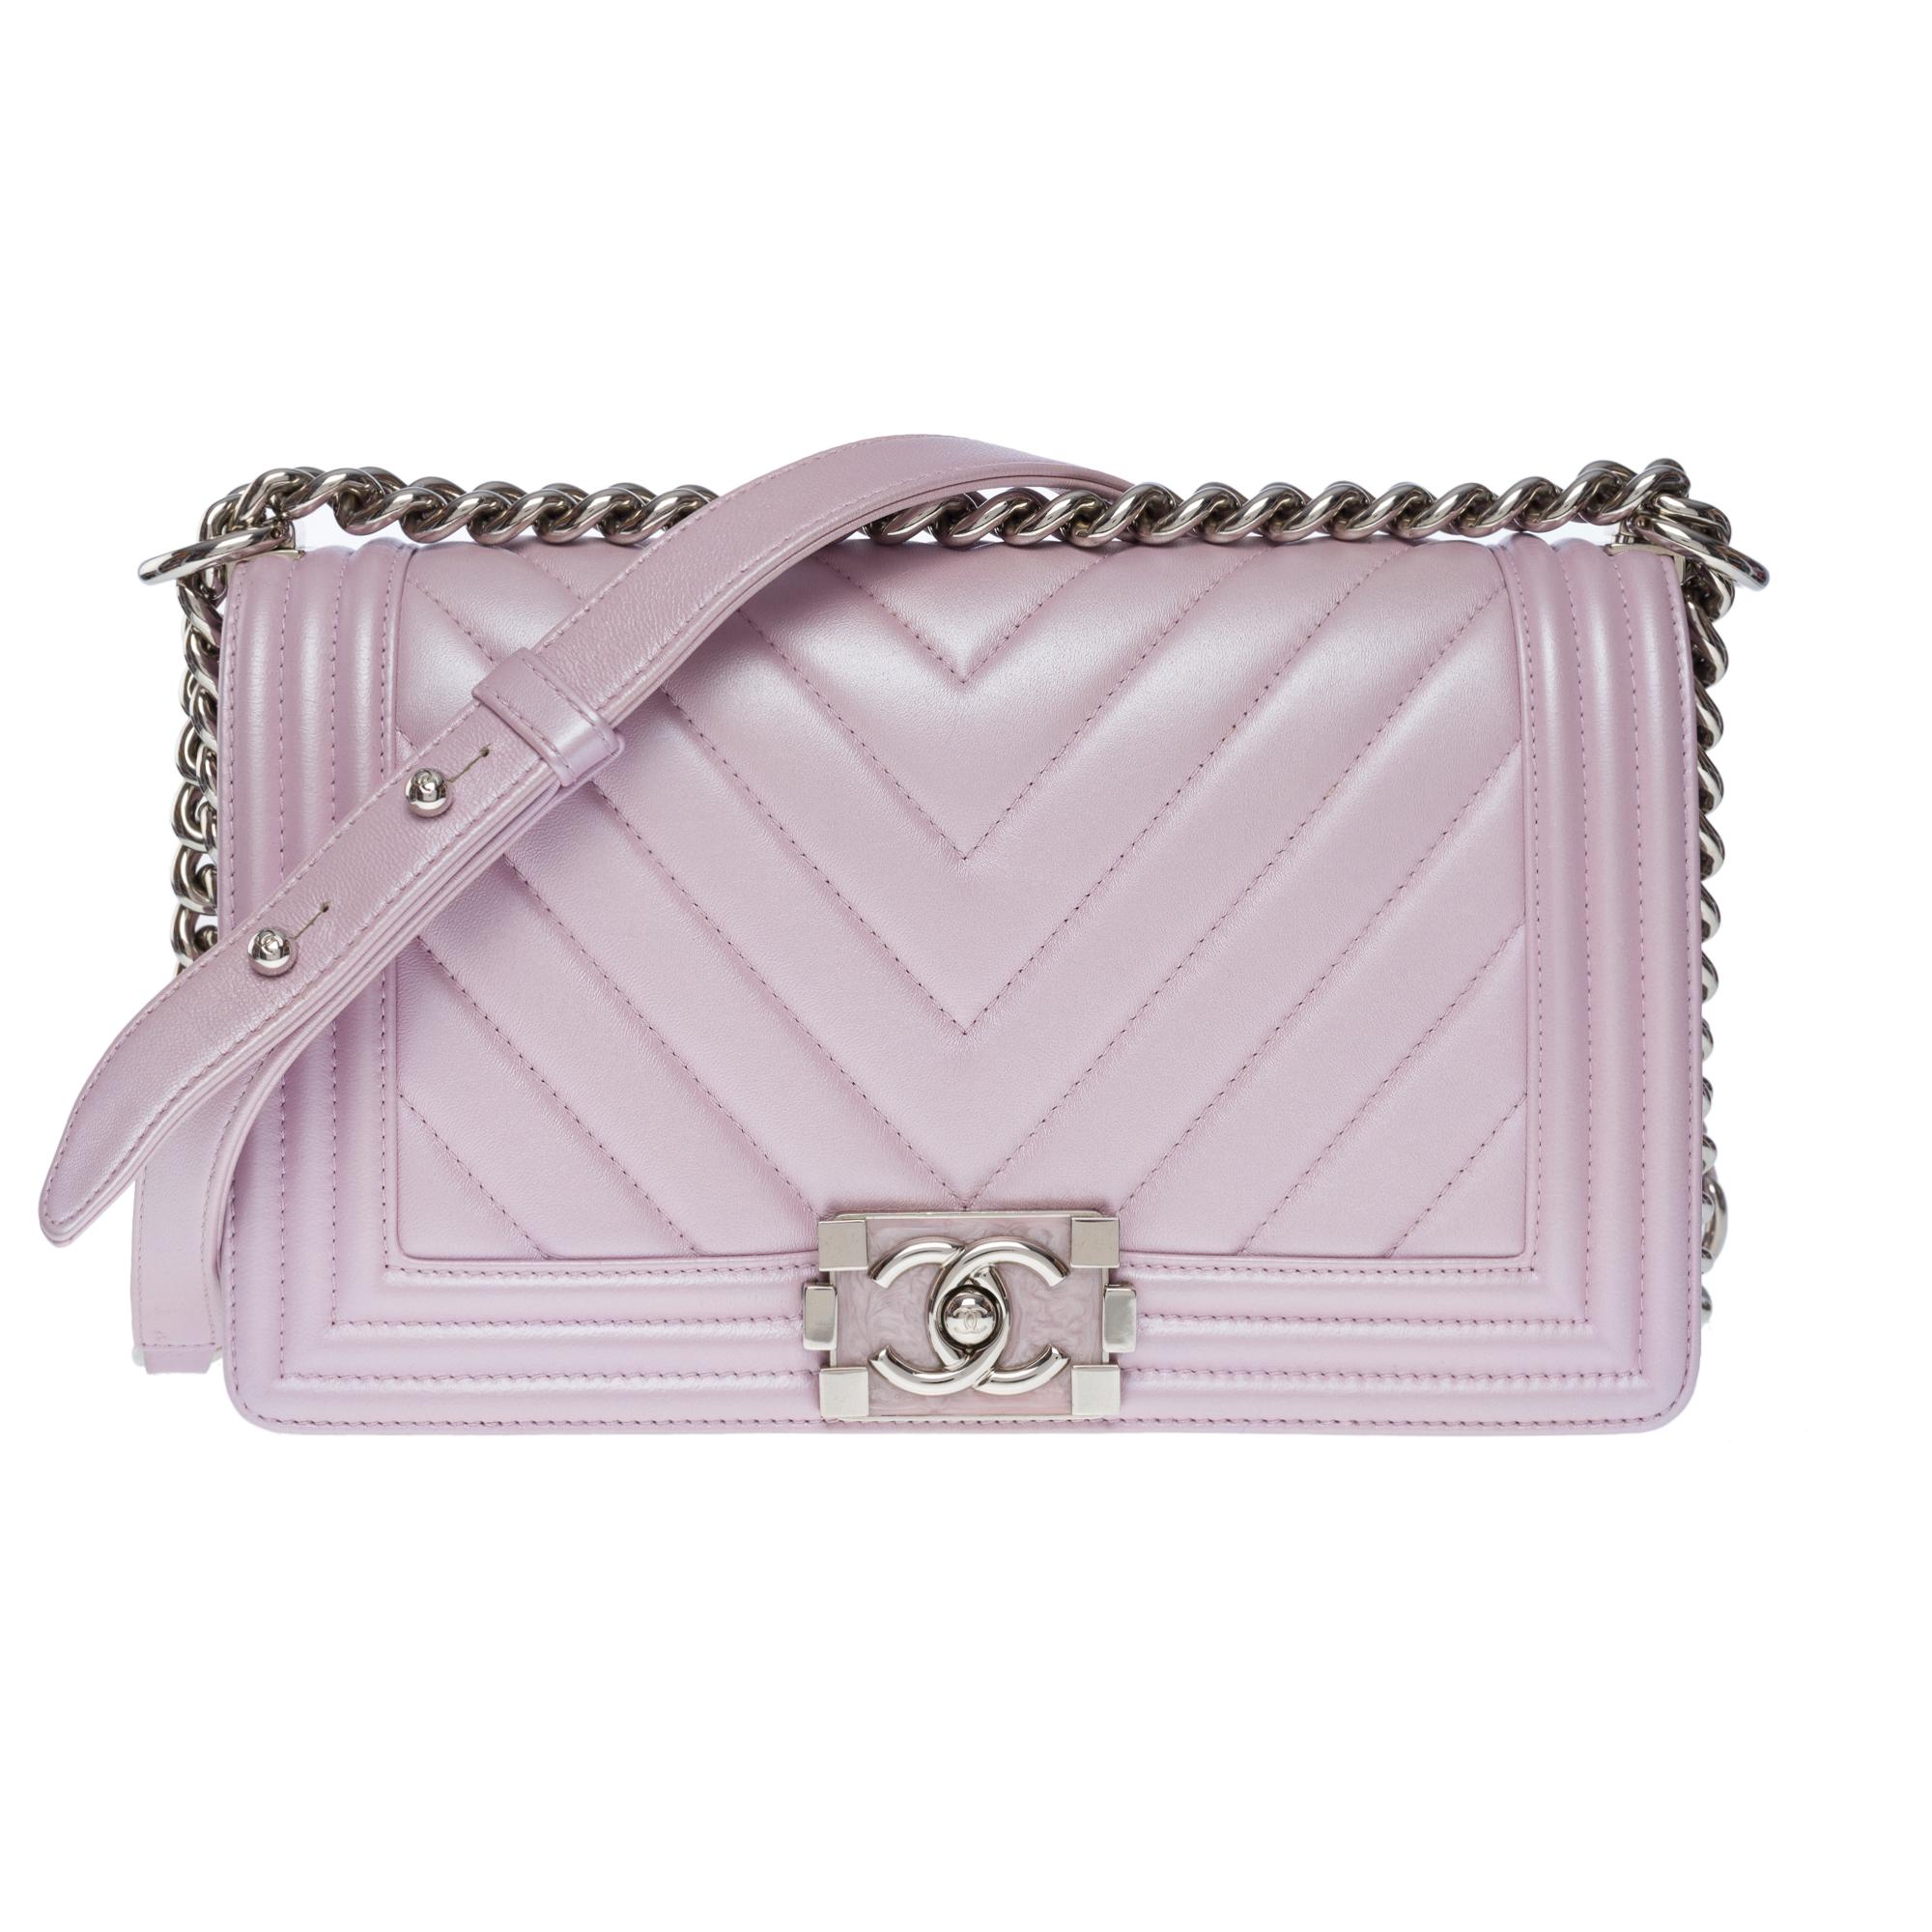 Exquisite & Rare Chanel Boy Old Medium limited edition in lilac quilted herringbone leather (Purple), silver metal hardware, silver metal chain handle and Lilac Leather for shoulder and crossbody carry
Full flap closure, CC silver push button